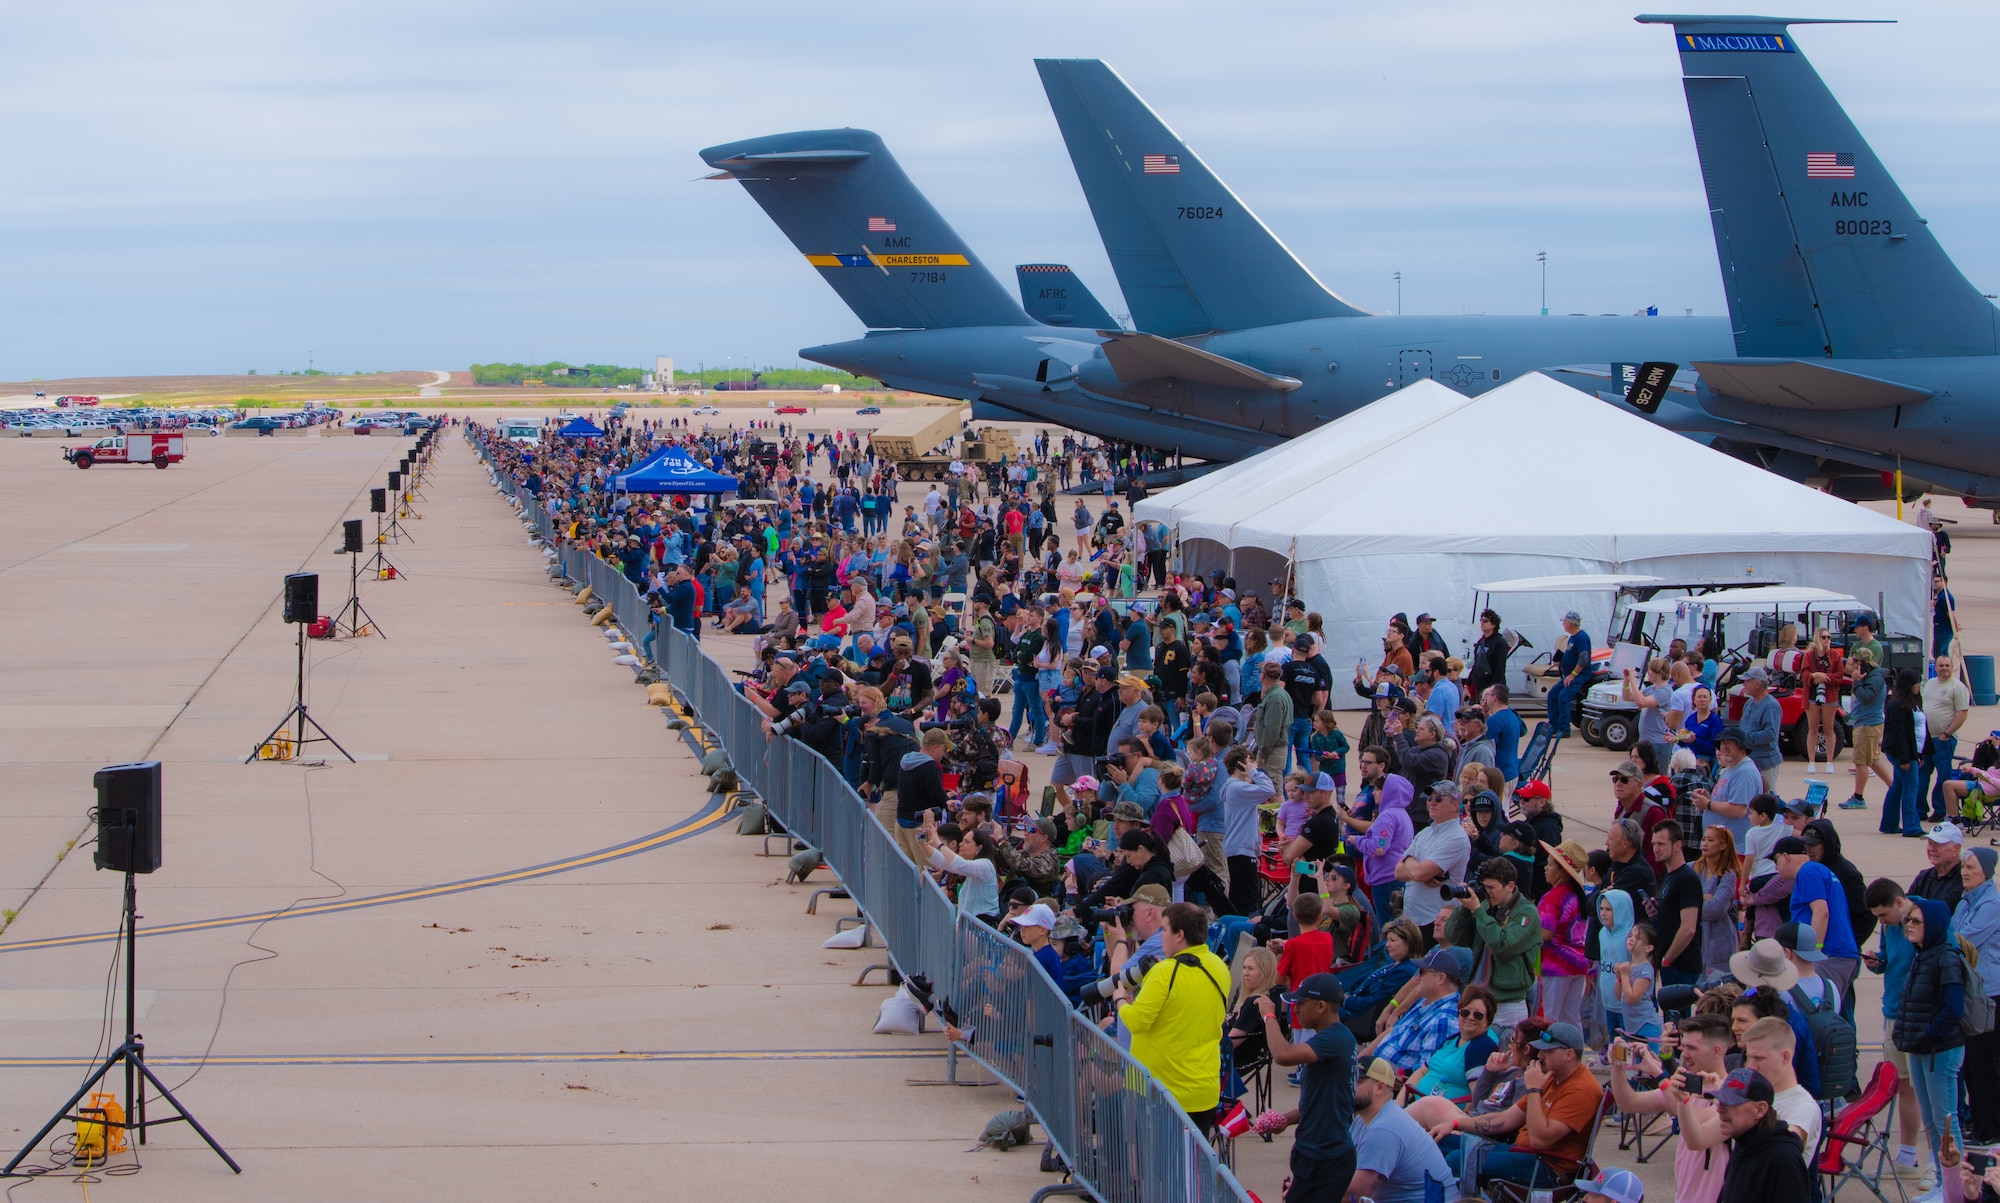 Air show attendees observe static displays during the 2023 Dyess Big Country Air Fest on Dyess Air Force Base, Texas, April 22, 2023. More than 30,000 event goers attended the one-day event highlighting the best of America’s only Lift and Strike base, Air Force heritage and Dyess community partners. The air show featured the F-22 Raptor demo team, U.S. Air Force Academy Wings of Blue, U.S. Army Golden Knights, WW II heritage flight and B-1B Lancer and C-130J Super Hercules fly overs. (U.S. Air Force photo by Airman 1st Class Alondra Cristobal Hernandez)